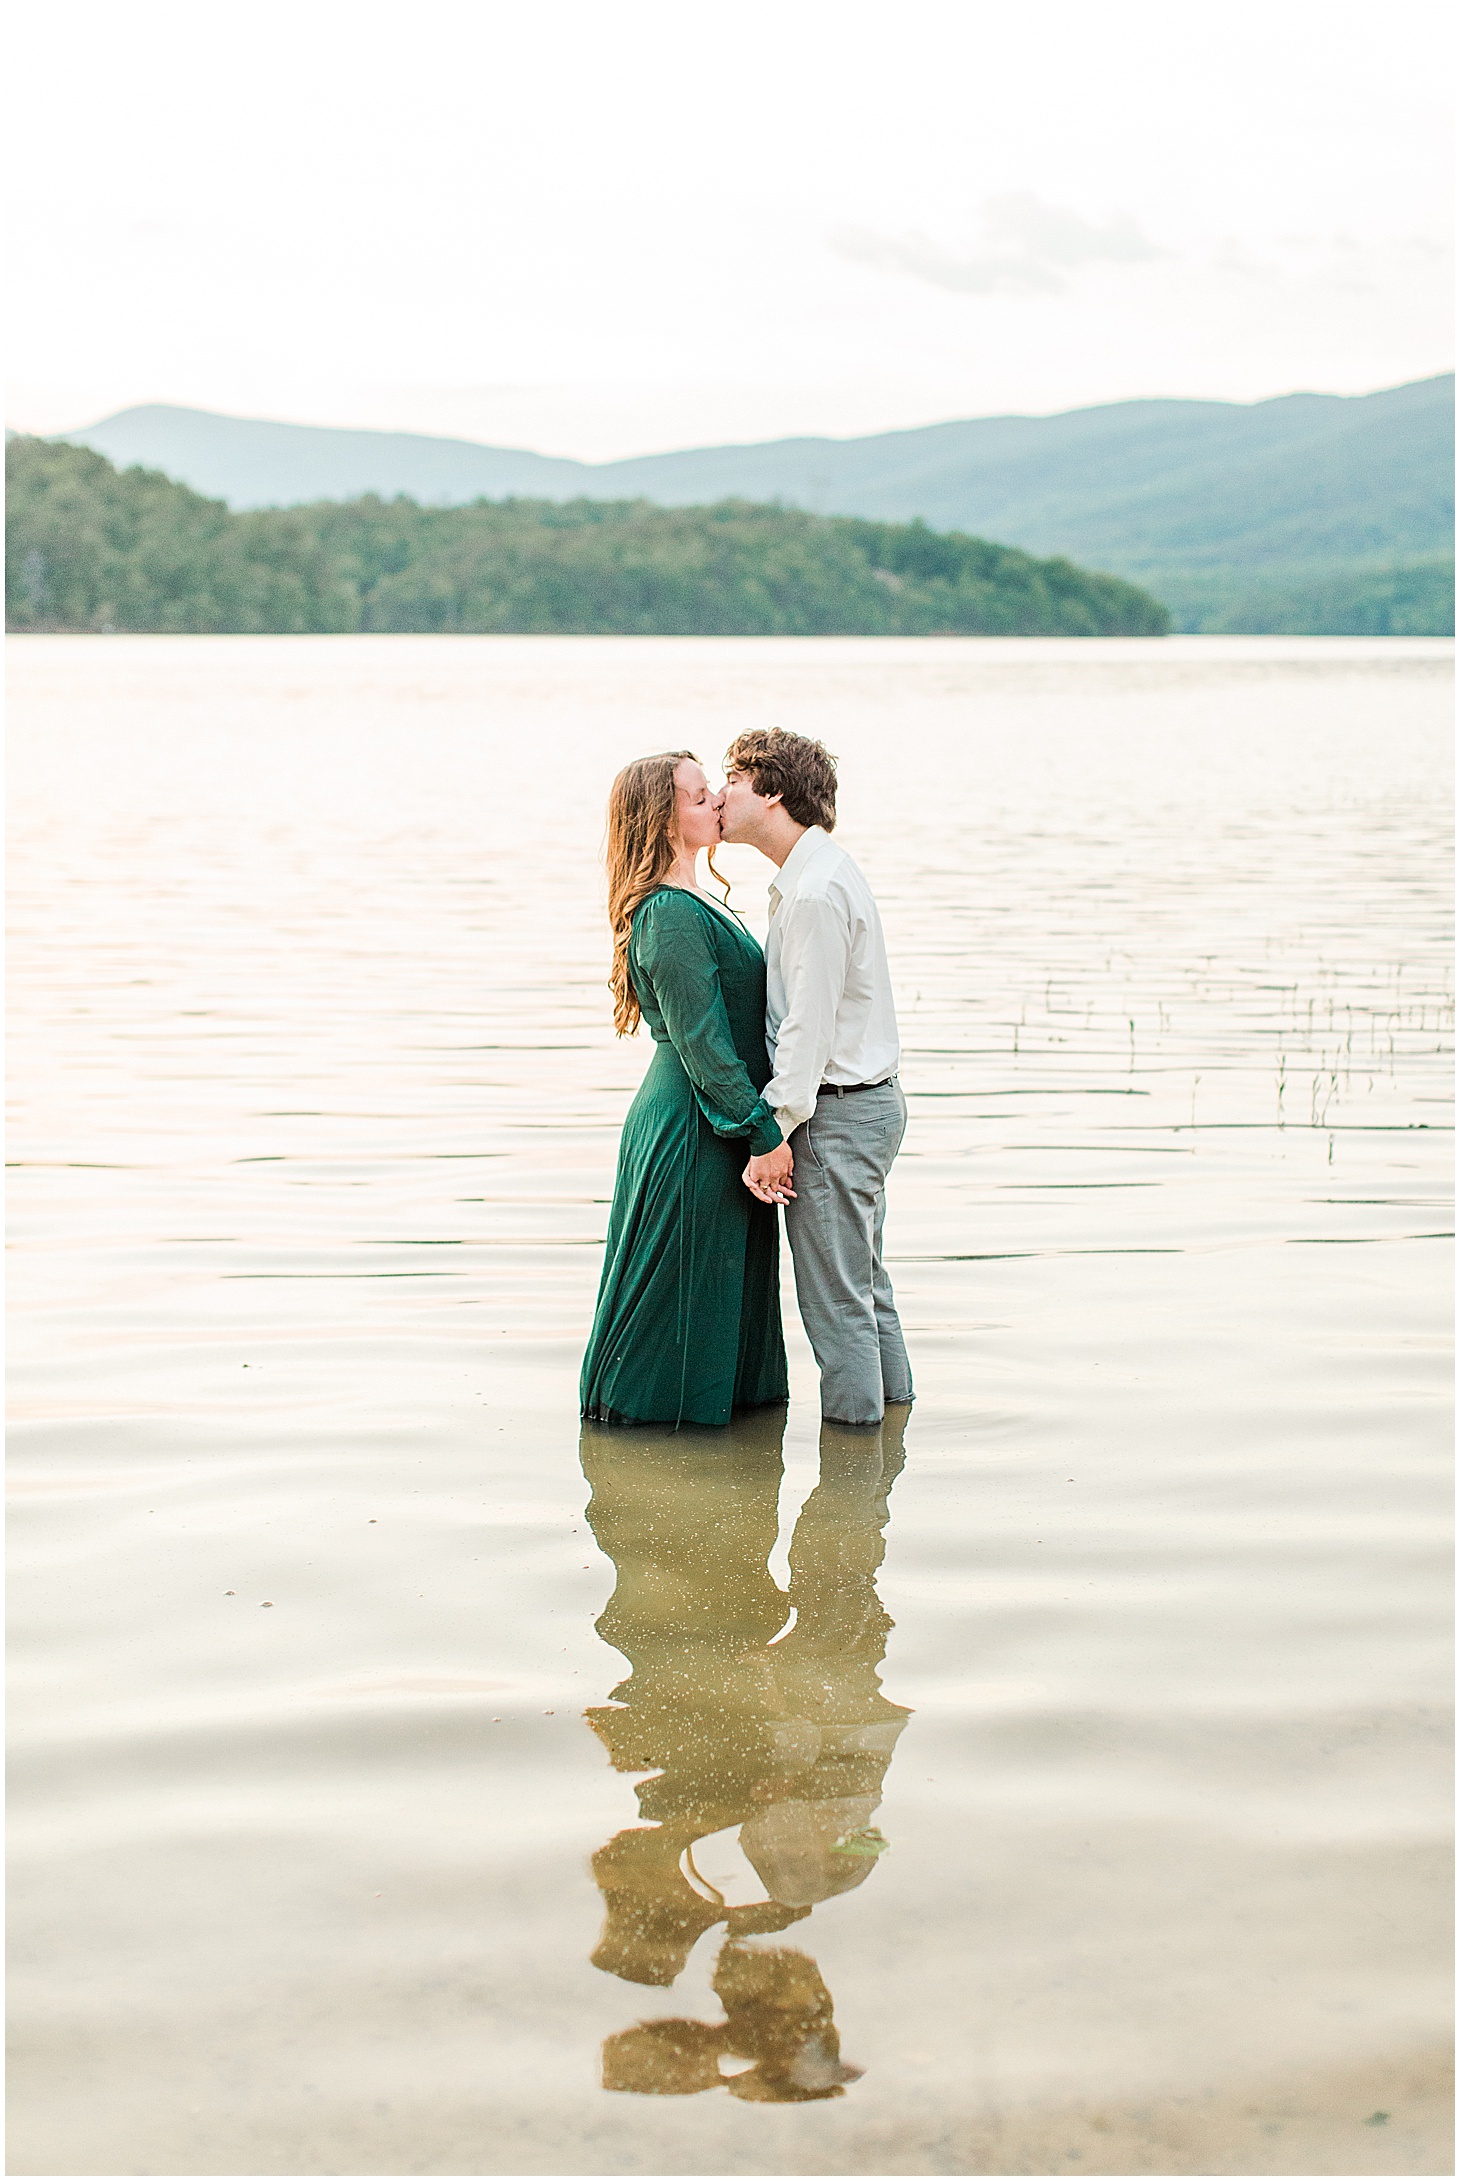 carvinscoveengagementsession_roanokeengagementsession_carvinscove_virginiawedding_virginiaweddingphotographer_vaweddingphotographer_photo_0076.jpg